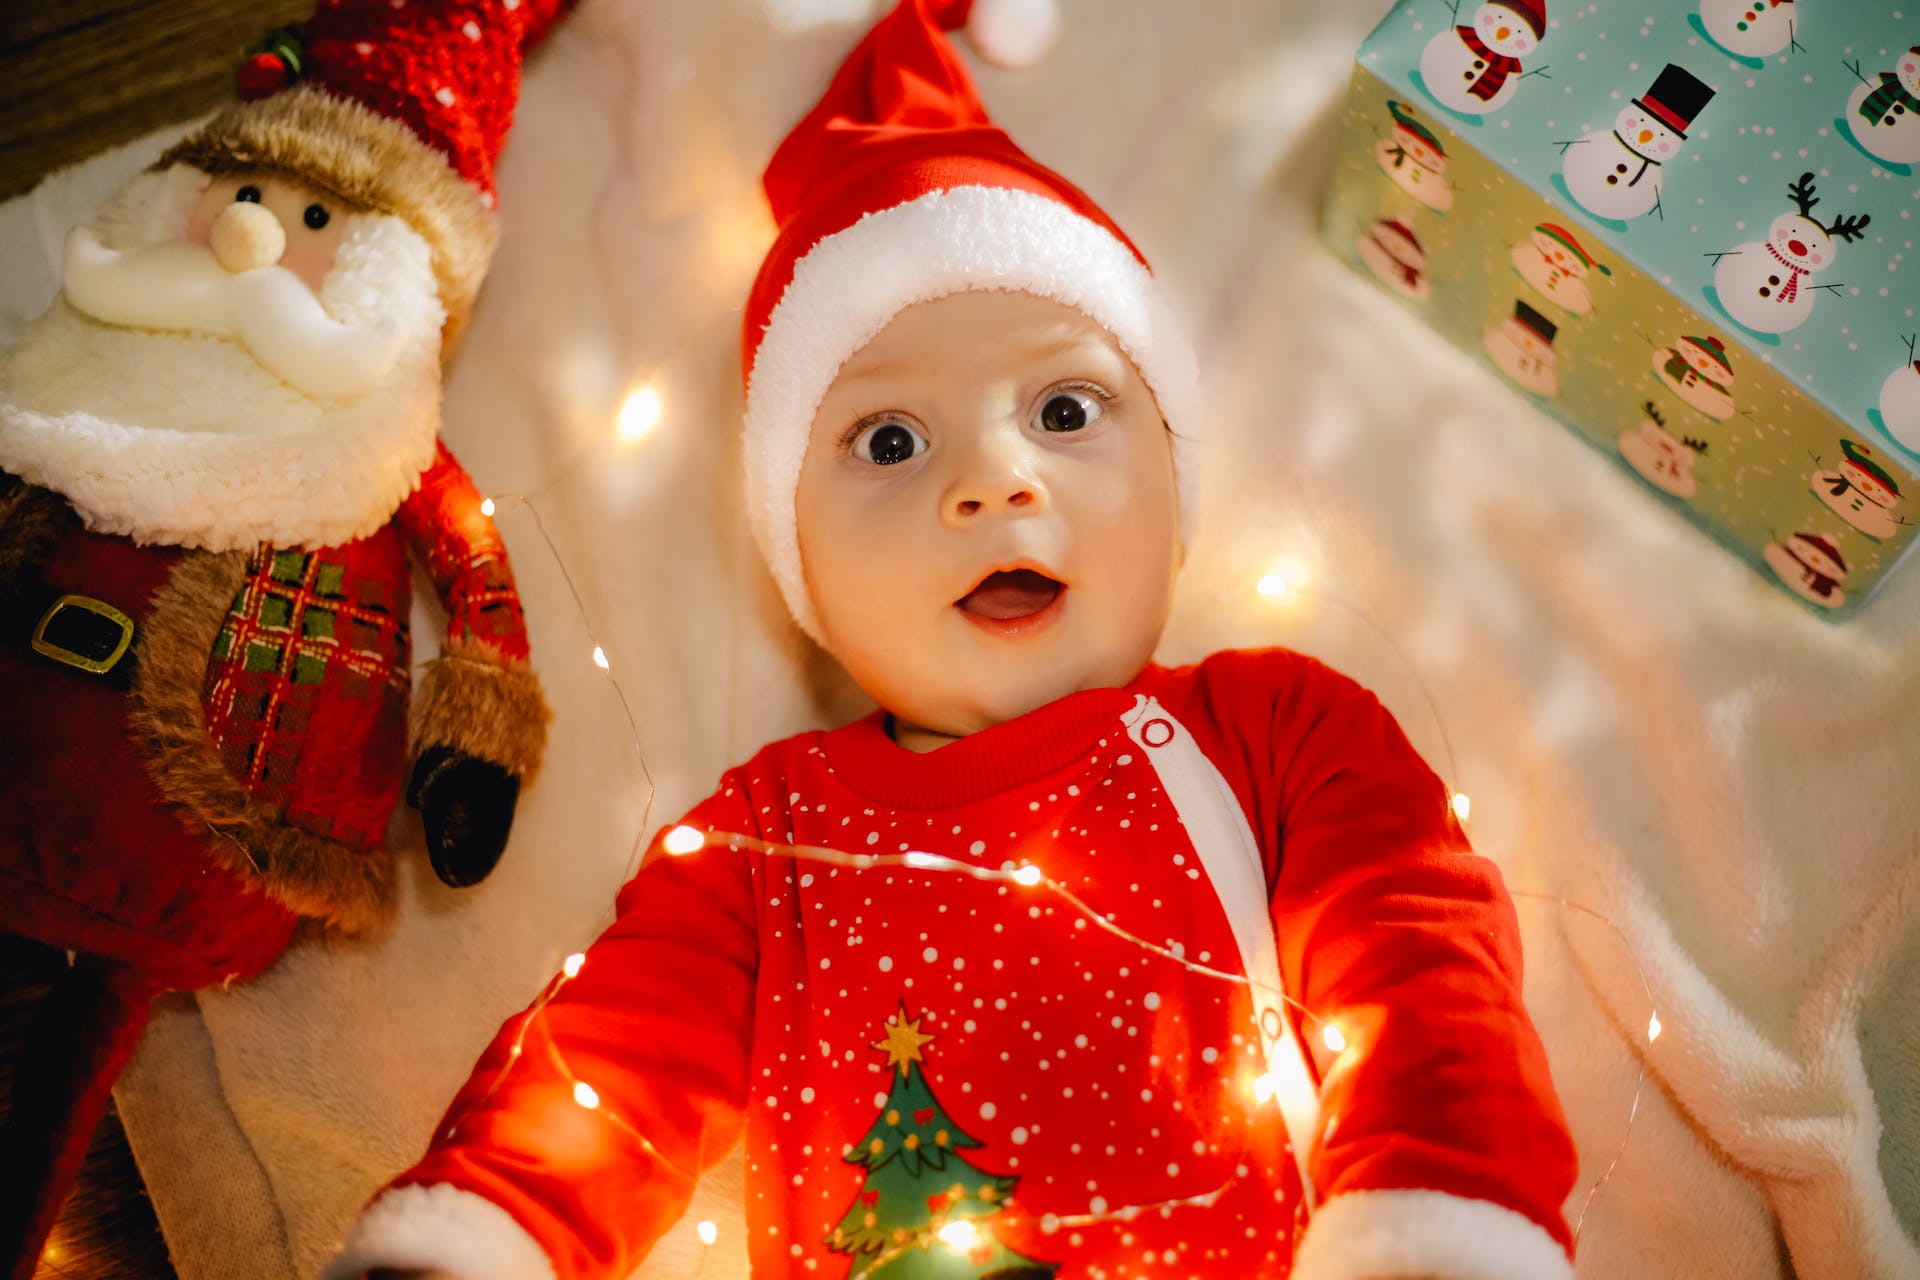 Baby in christmas outfit.